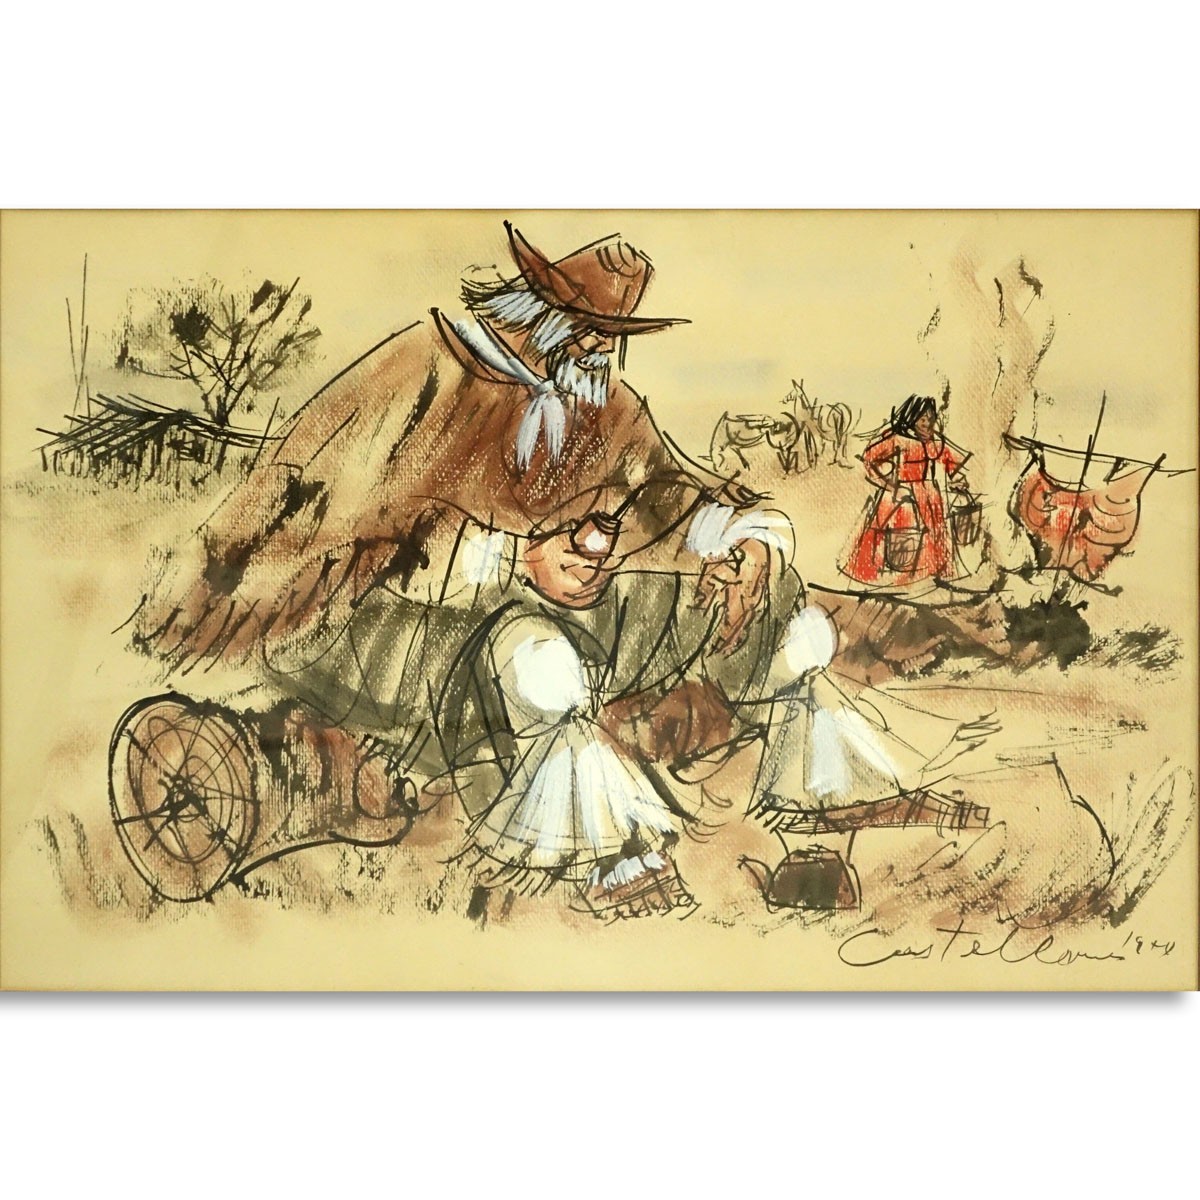 Elena Castellanos (20th C) Watercolor on Paper, Seated Gaucho Cowboy, Signed and Dated Lower Right. Good condition.